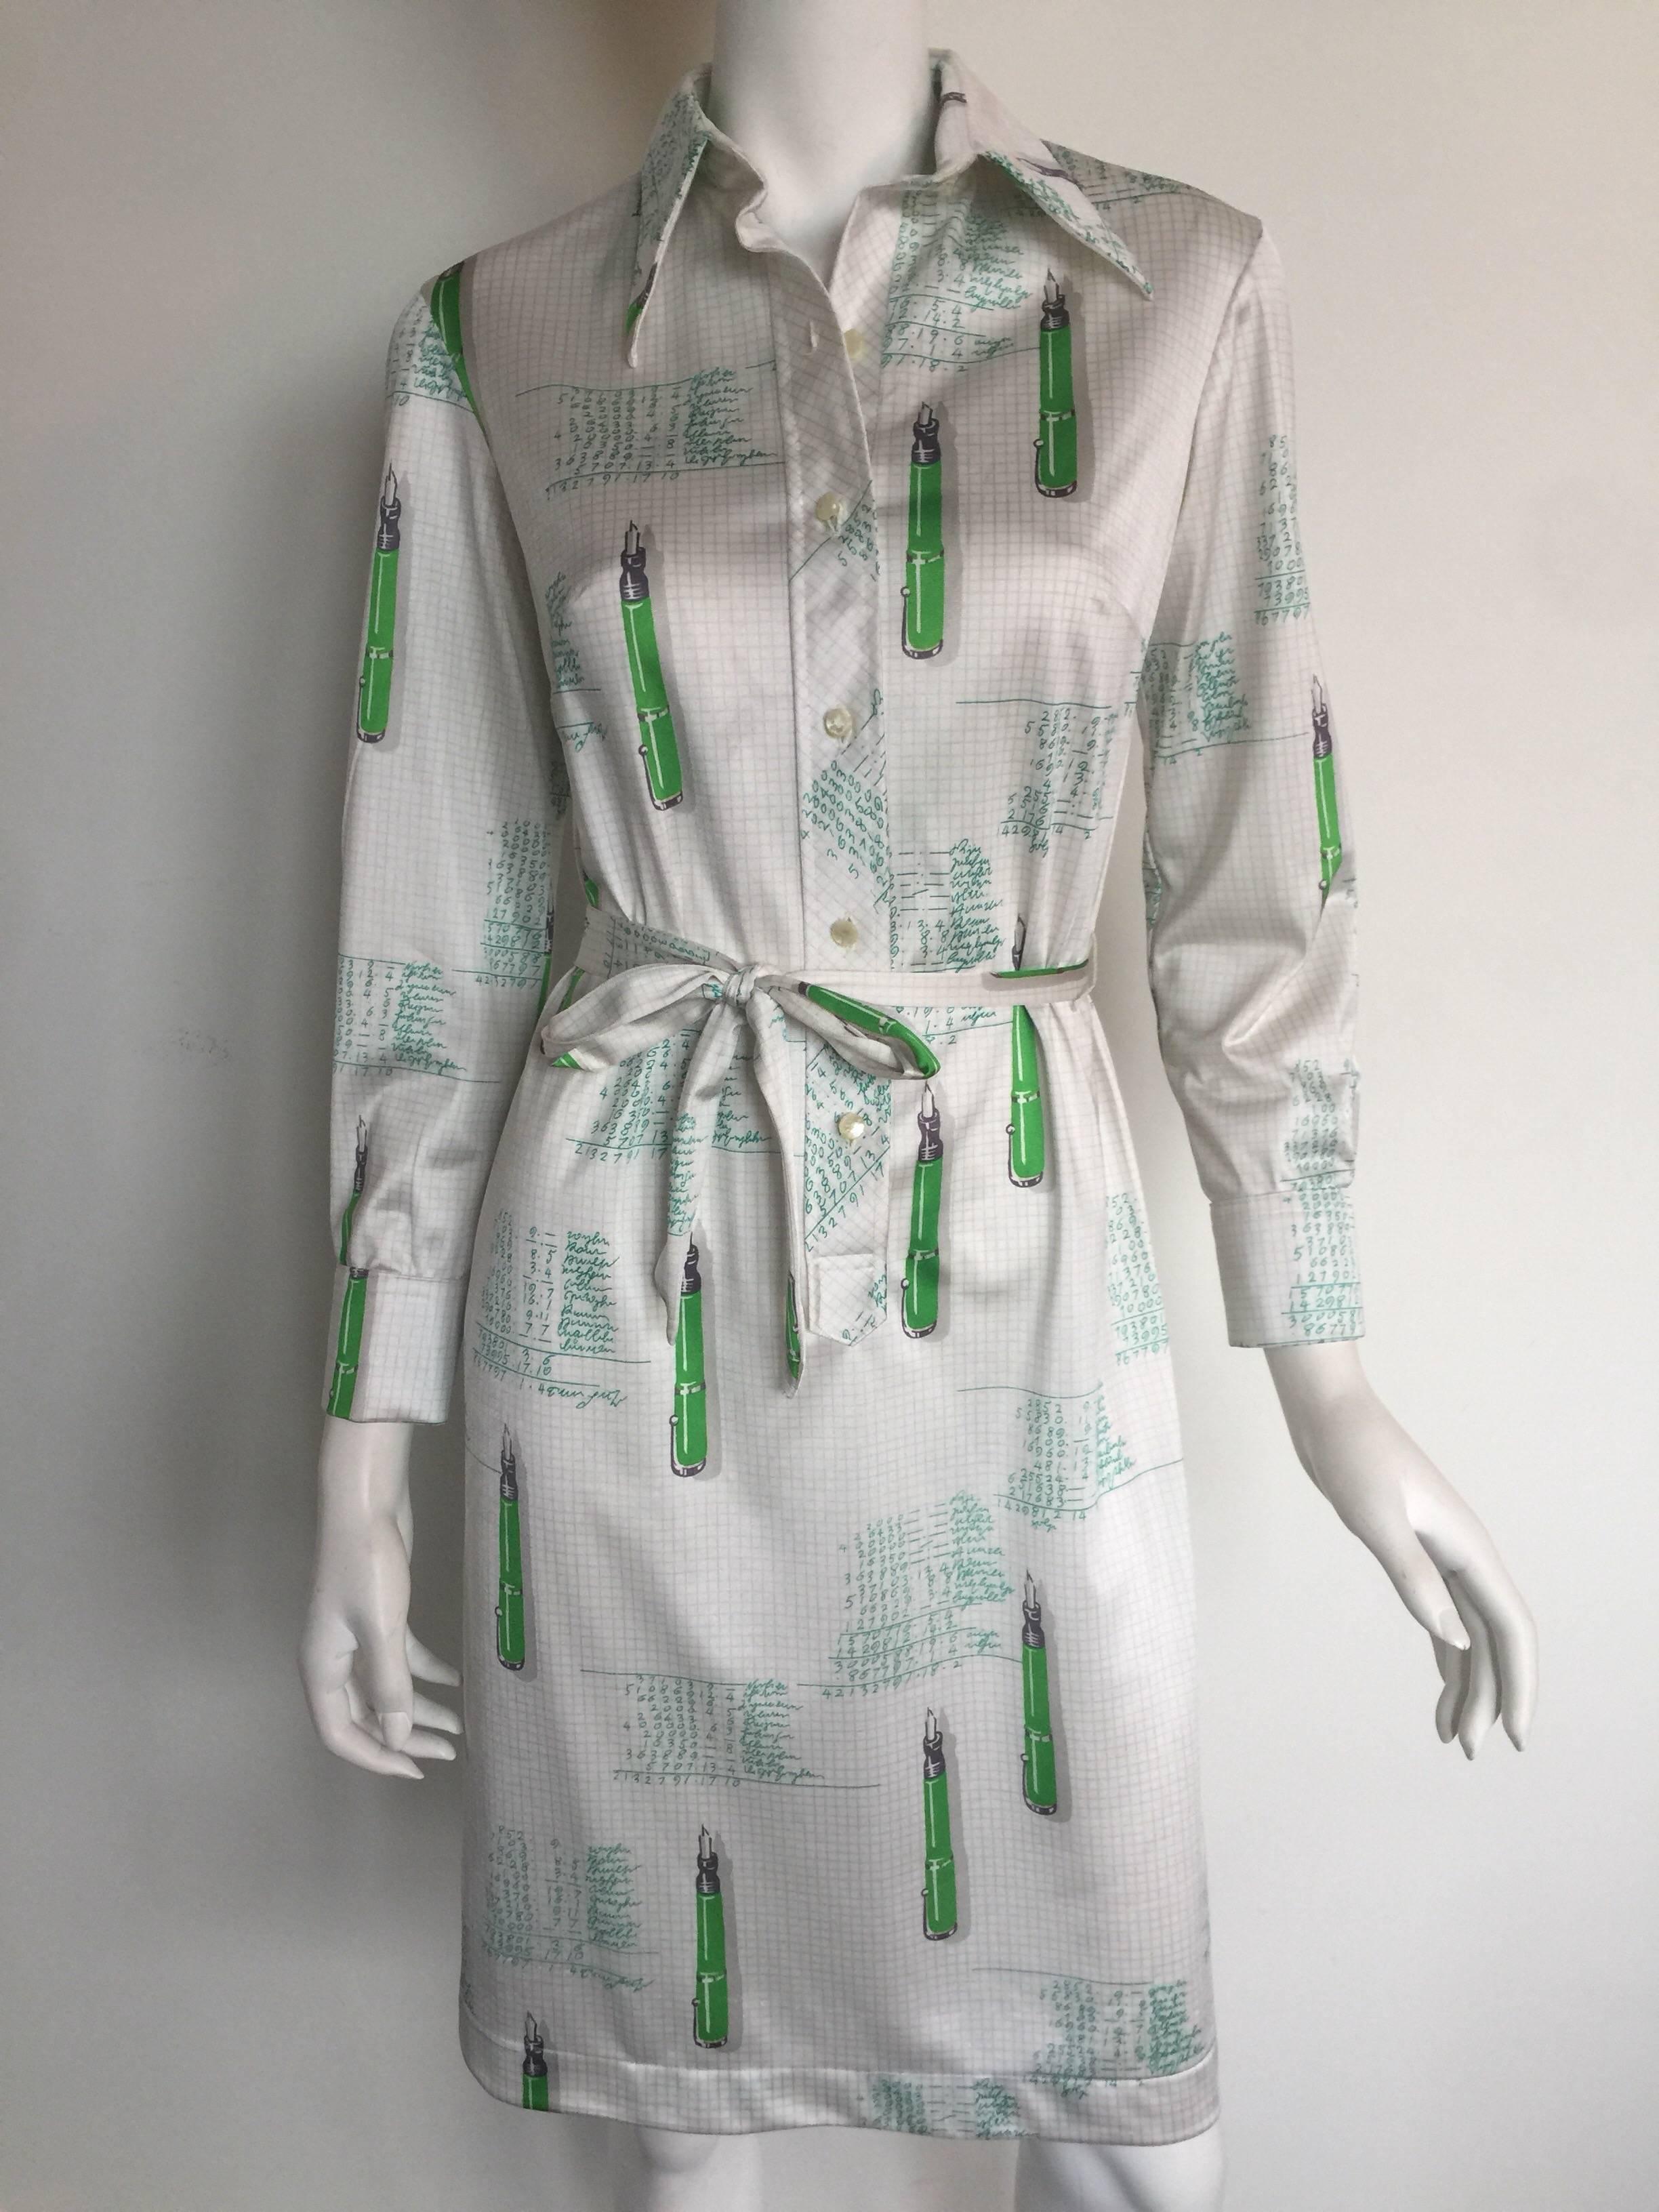 This Lanvin shirtdress is from the 1970s.  The dress has a faint grey and white school notebook grid print with green pens and math scribble.  It is an adorable and unique print.  The neck has an exaggerated V collar lapel as is very 70s.  There is